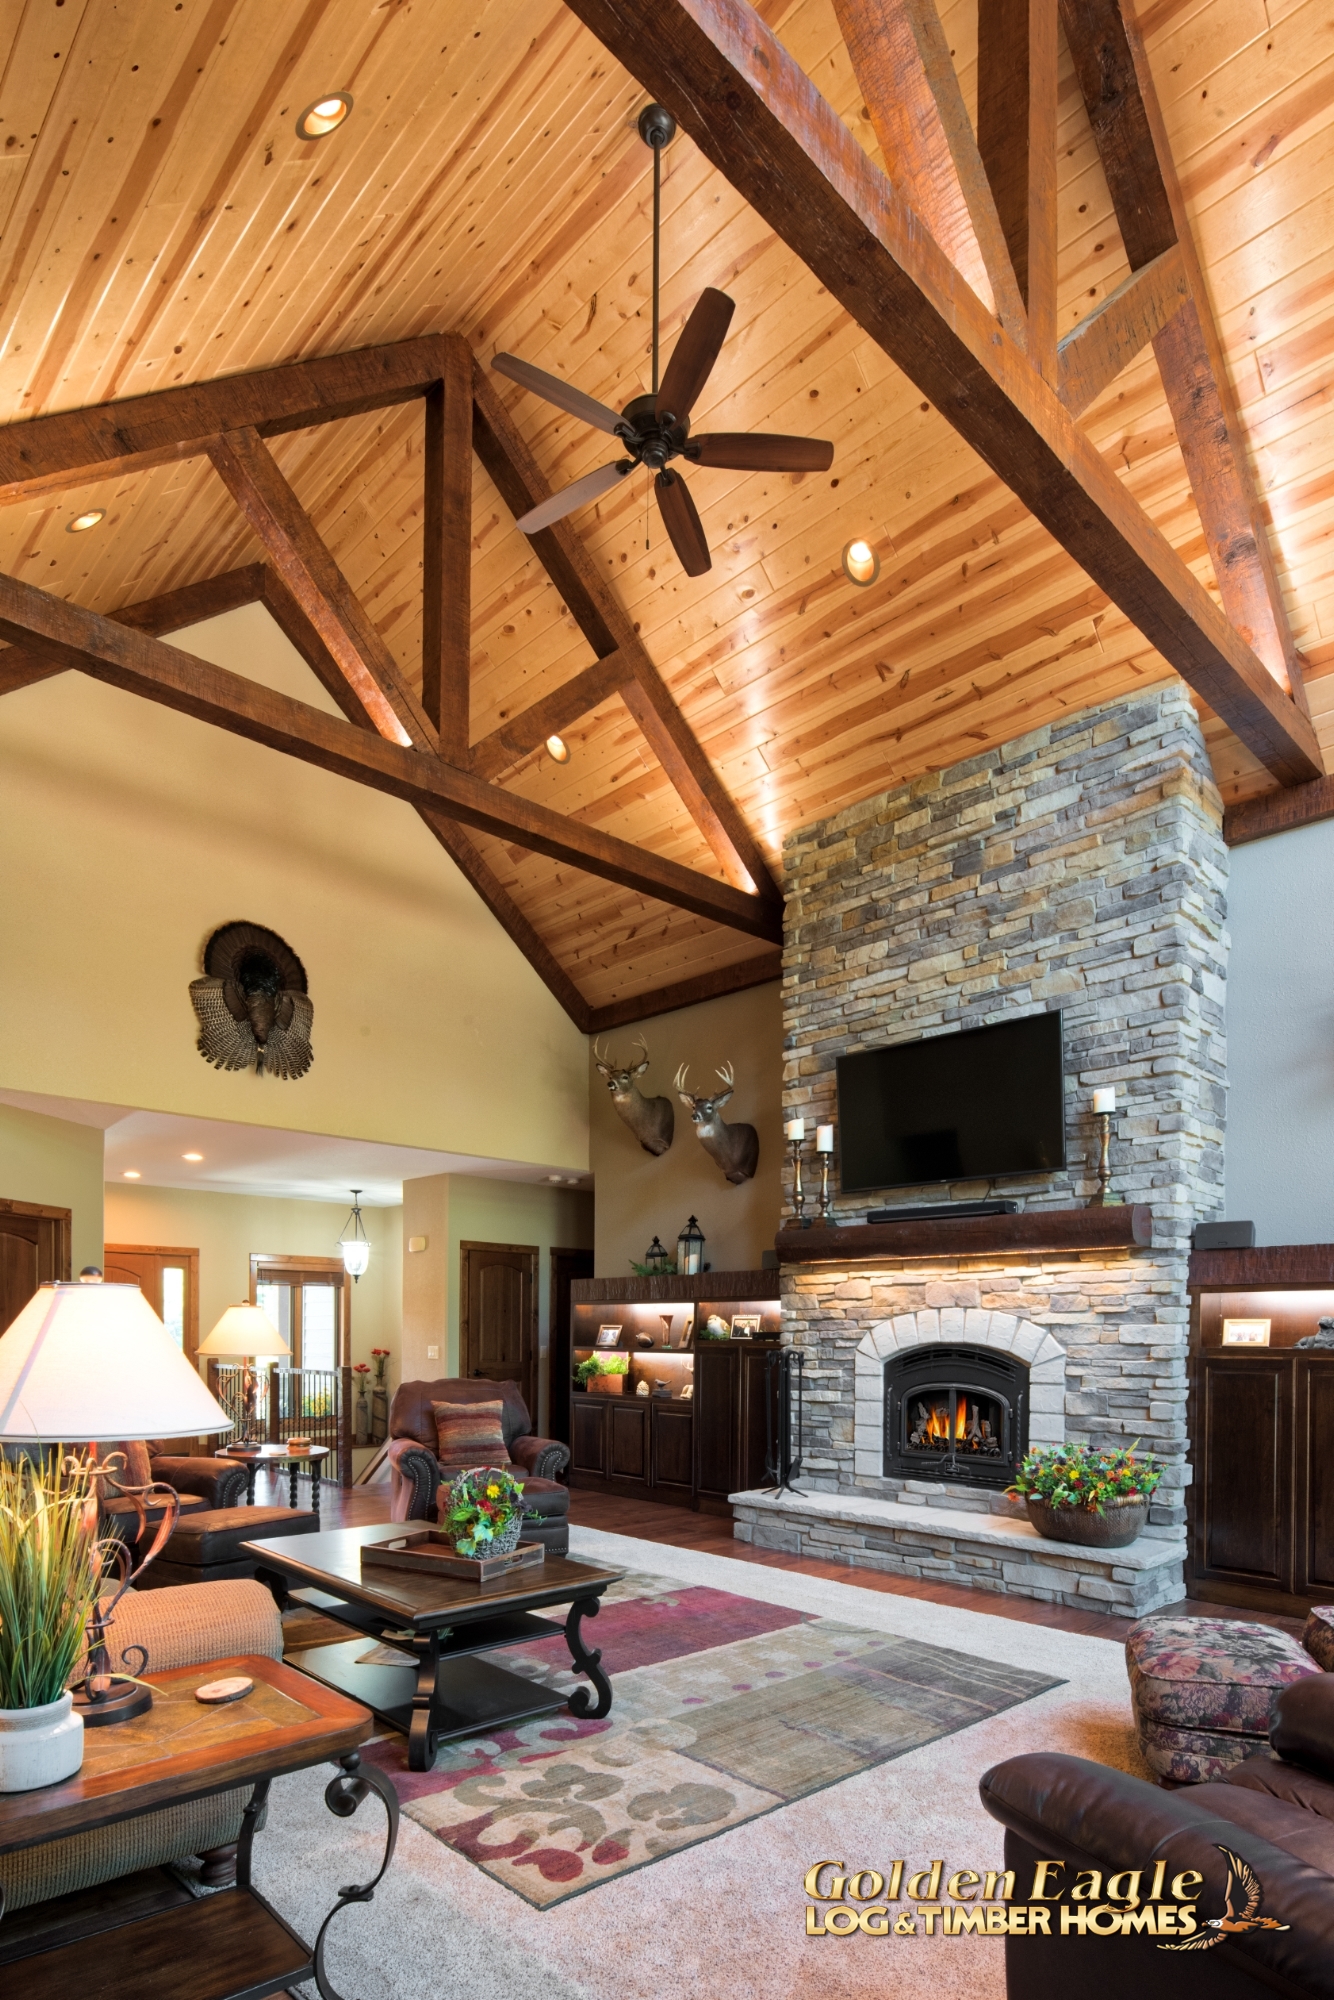 Golden Eagle Log And Timber Homes Exposed Beam Timber